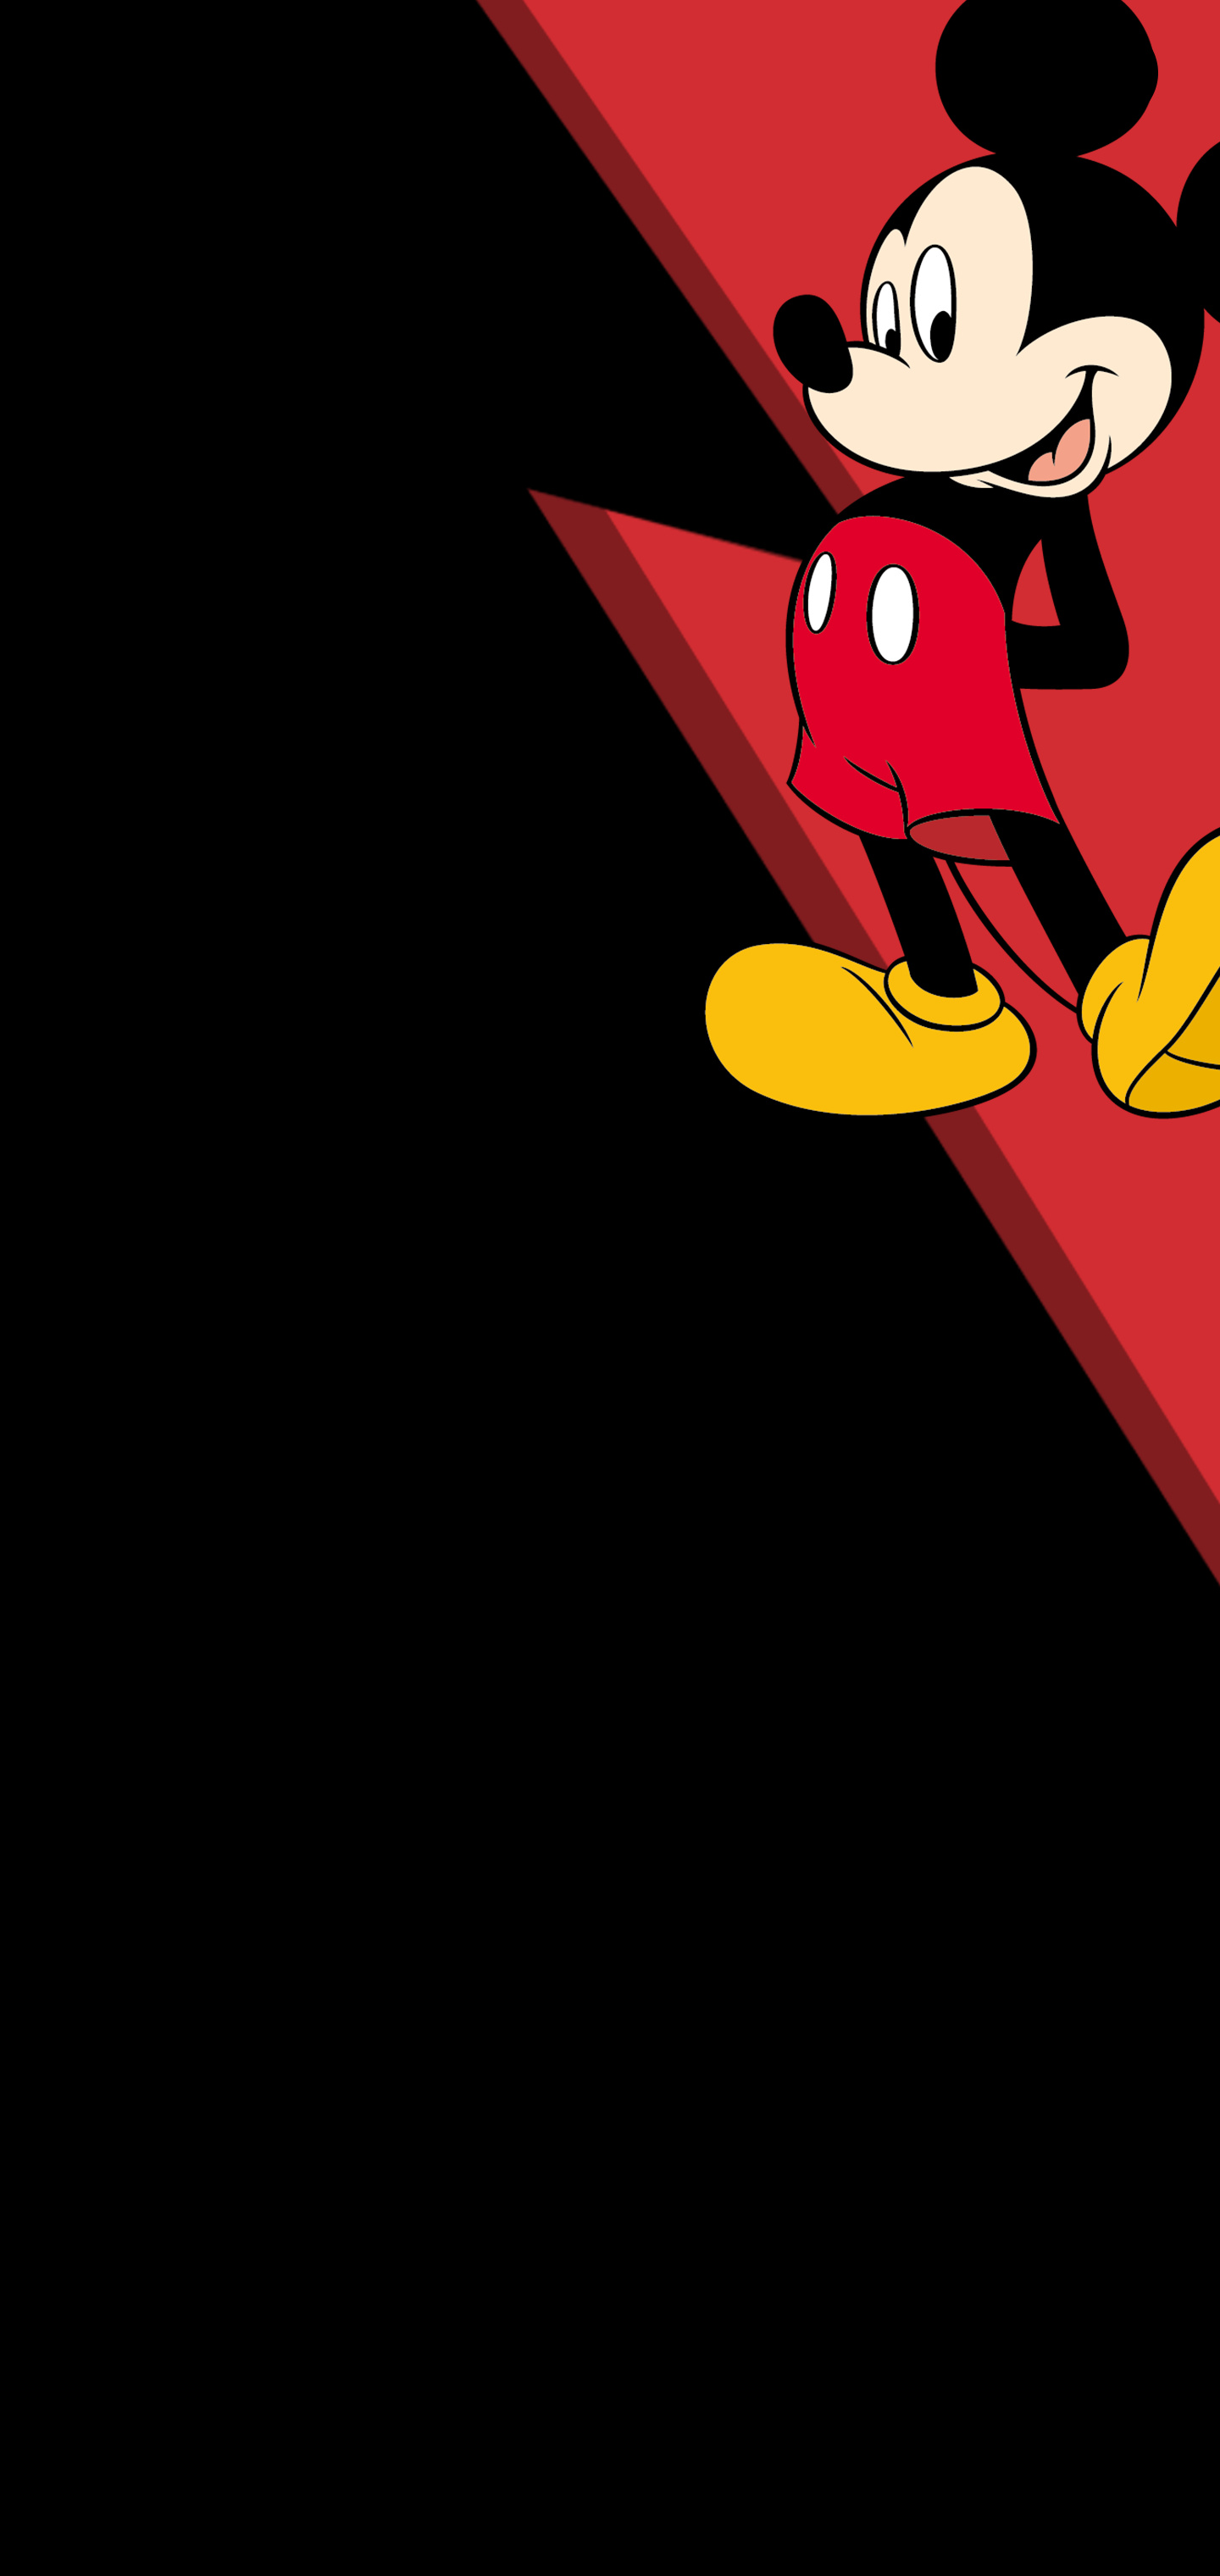 Mickey Mouse in AMOLED, Rich colors, Satisfying wallpapers, 1440x3040 HD Handy